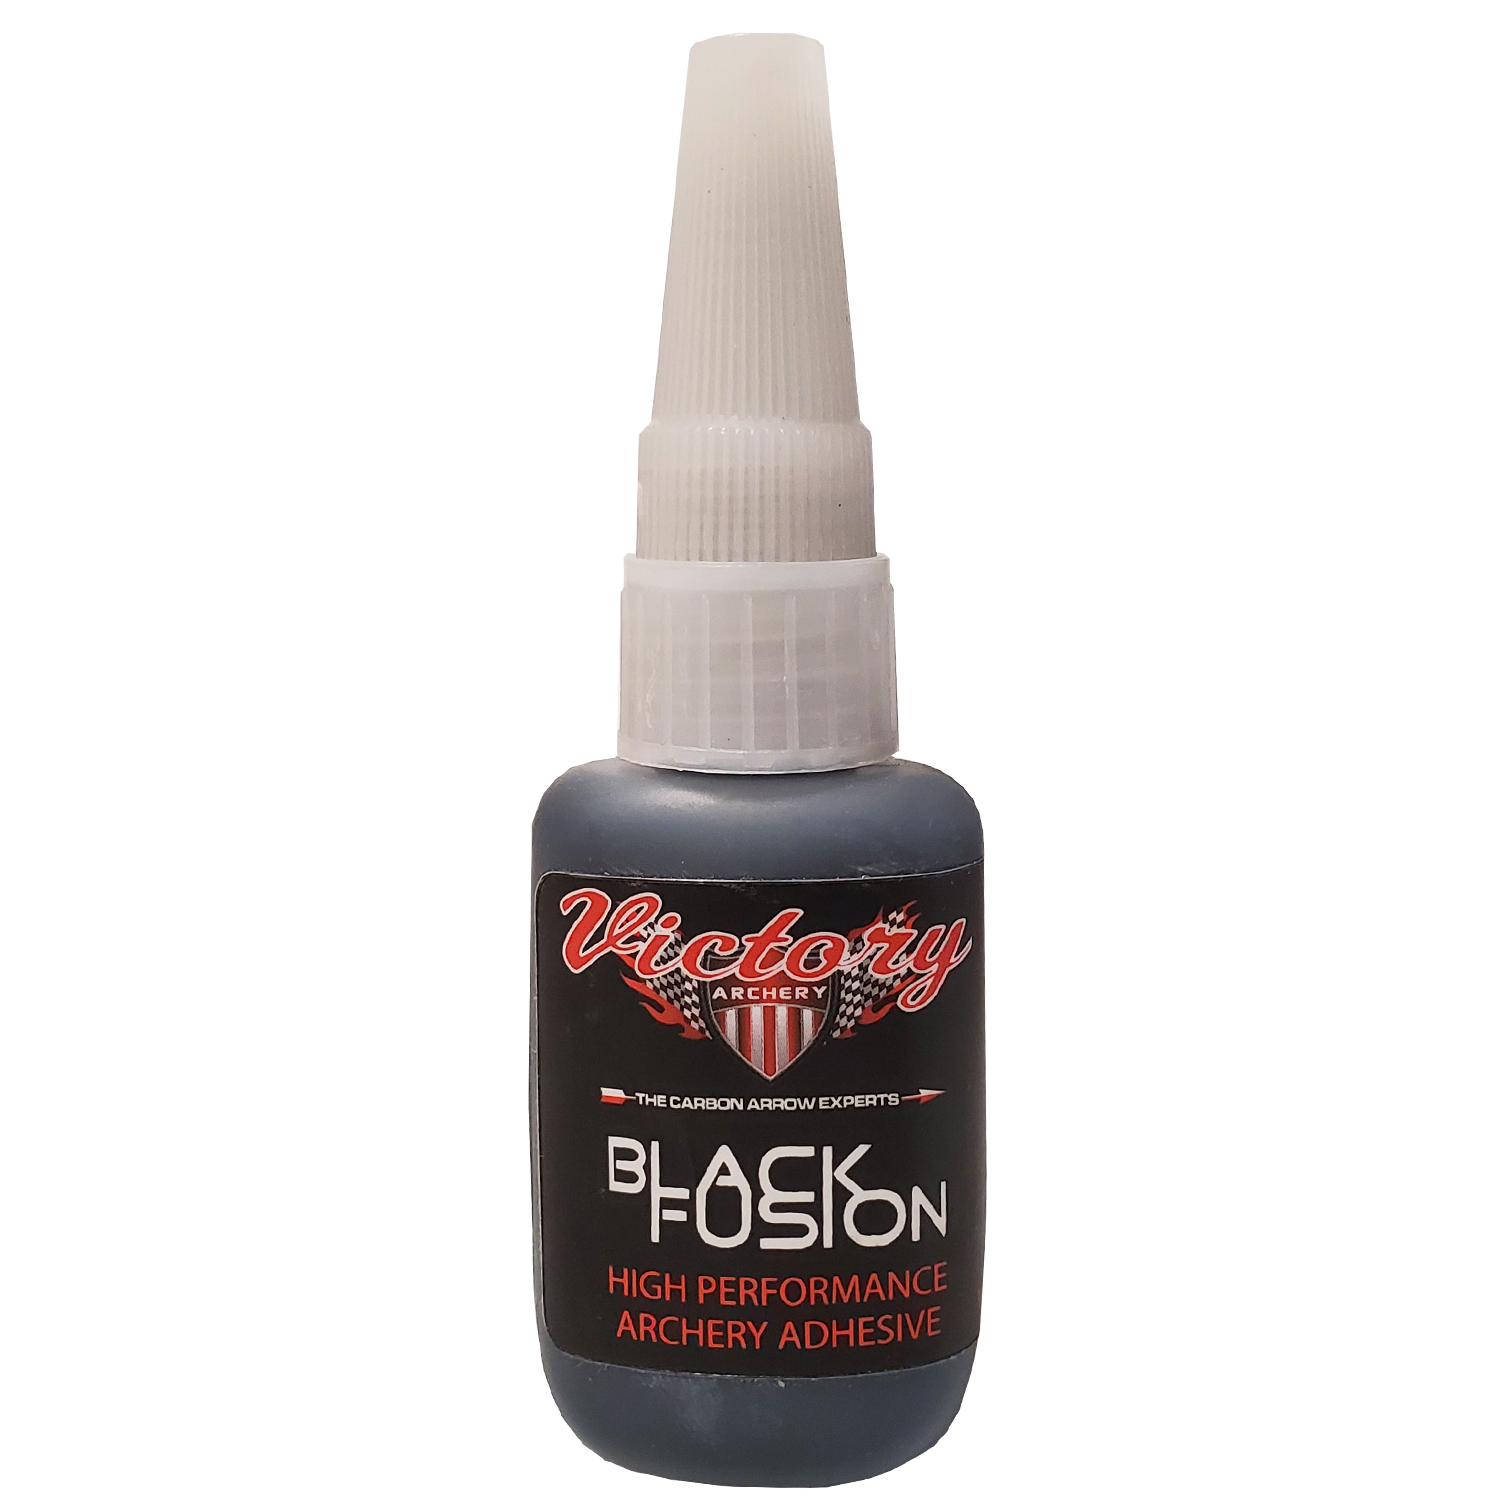 https://farmsteadoutdoors.com/wp-content/uploads/2021/01/Victory-02467-Victory-Archery-Black-Fusion-Insert-Adhesive.jpg